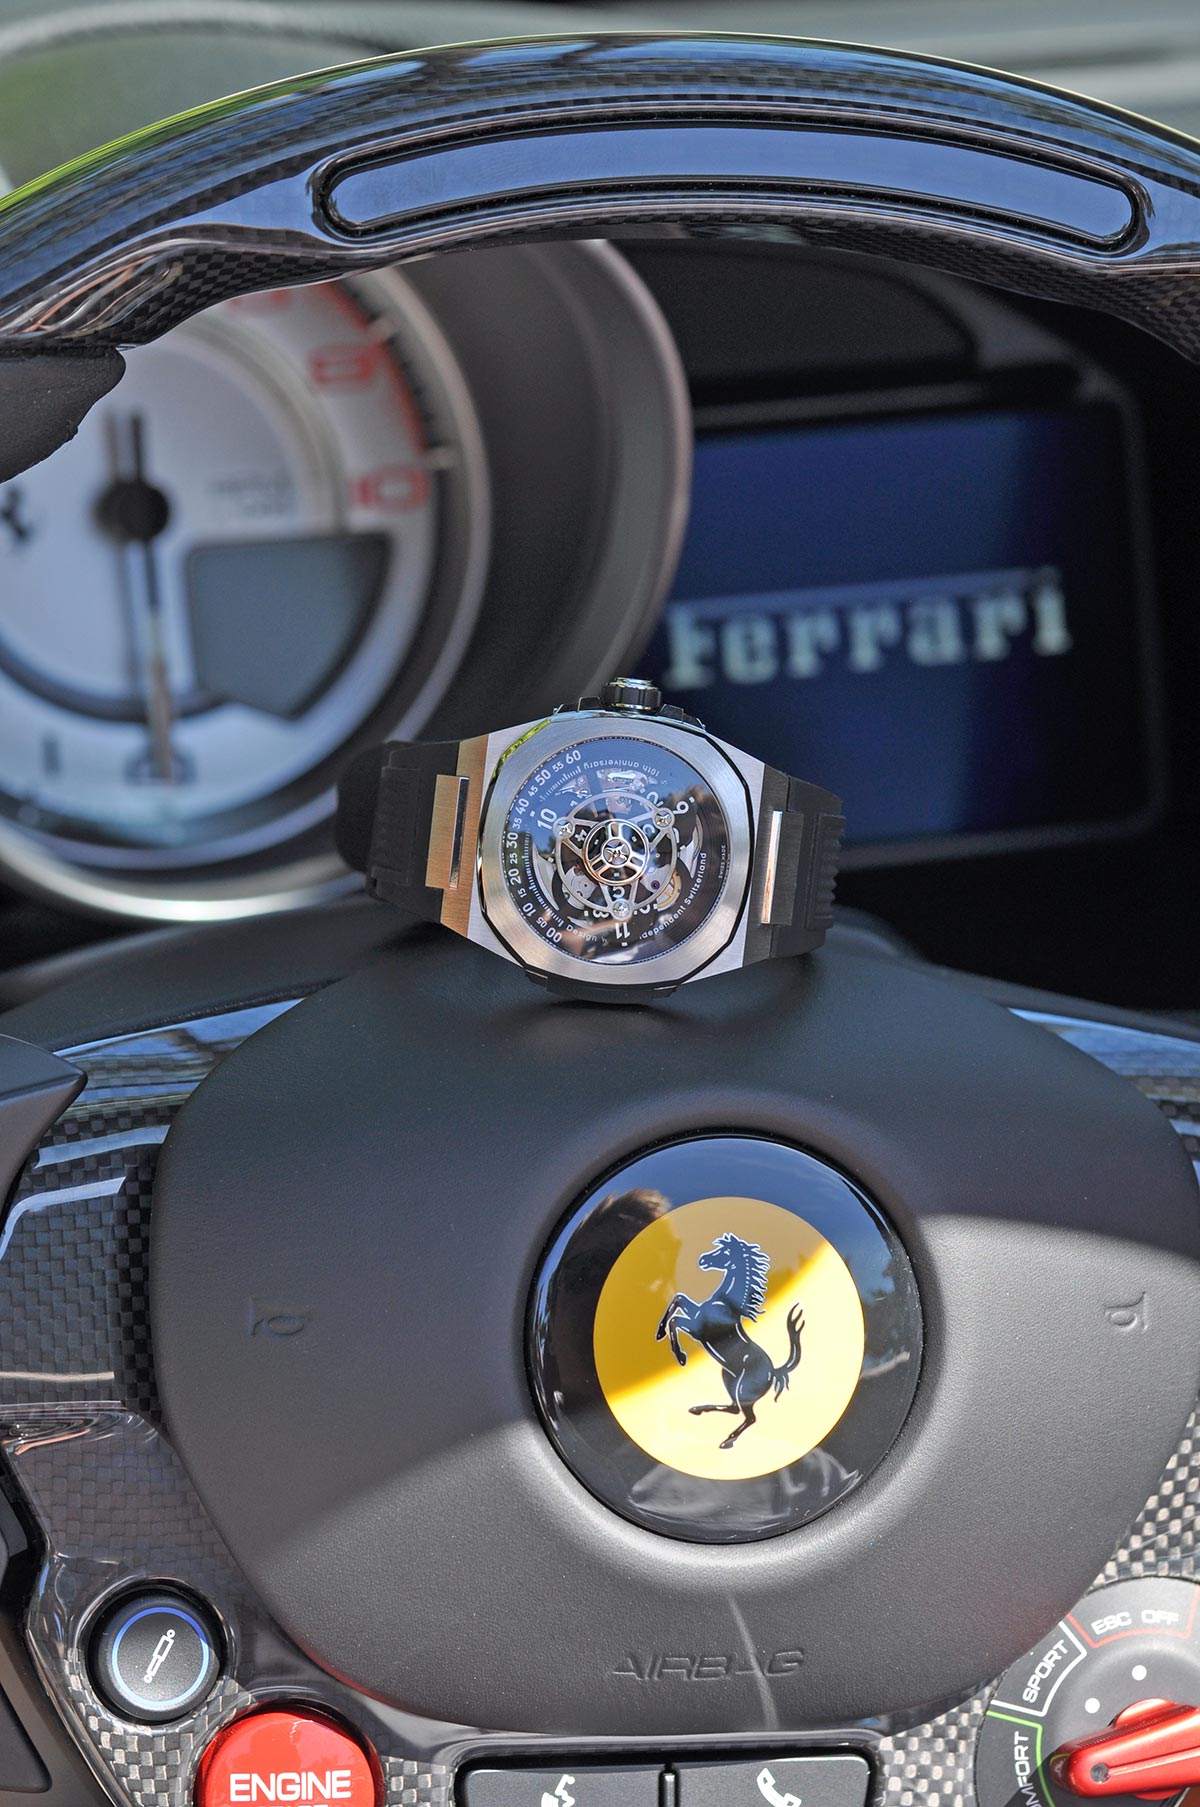 high end watches matching high end cars like ferrari, DWISS M3W wandering hours display, sapphire crystal, automatic movement